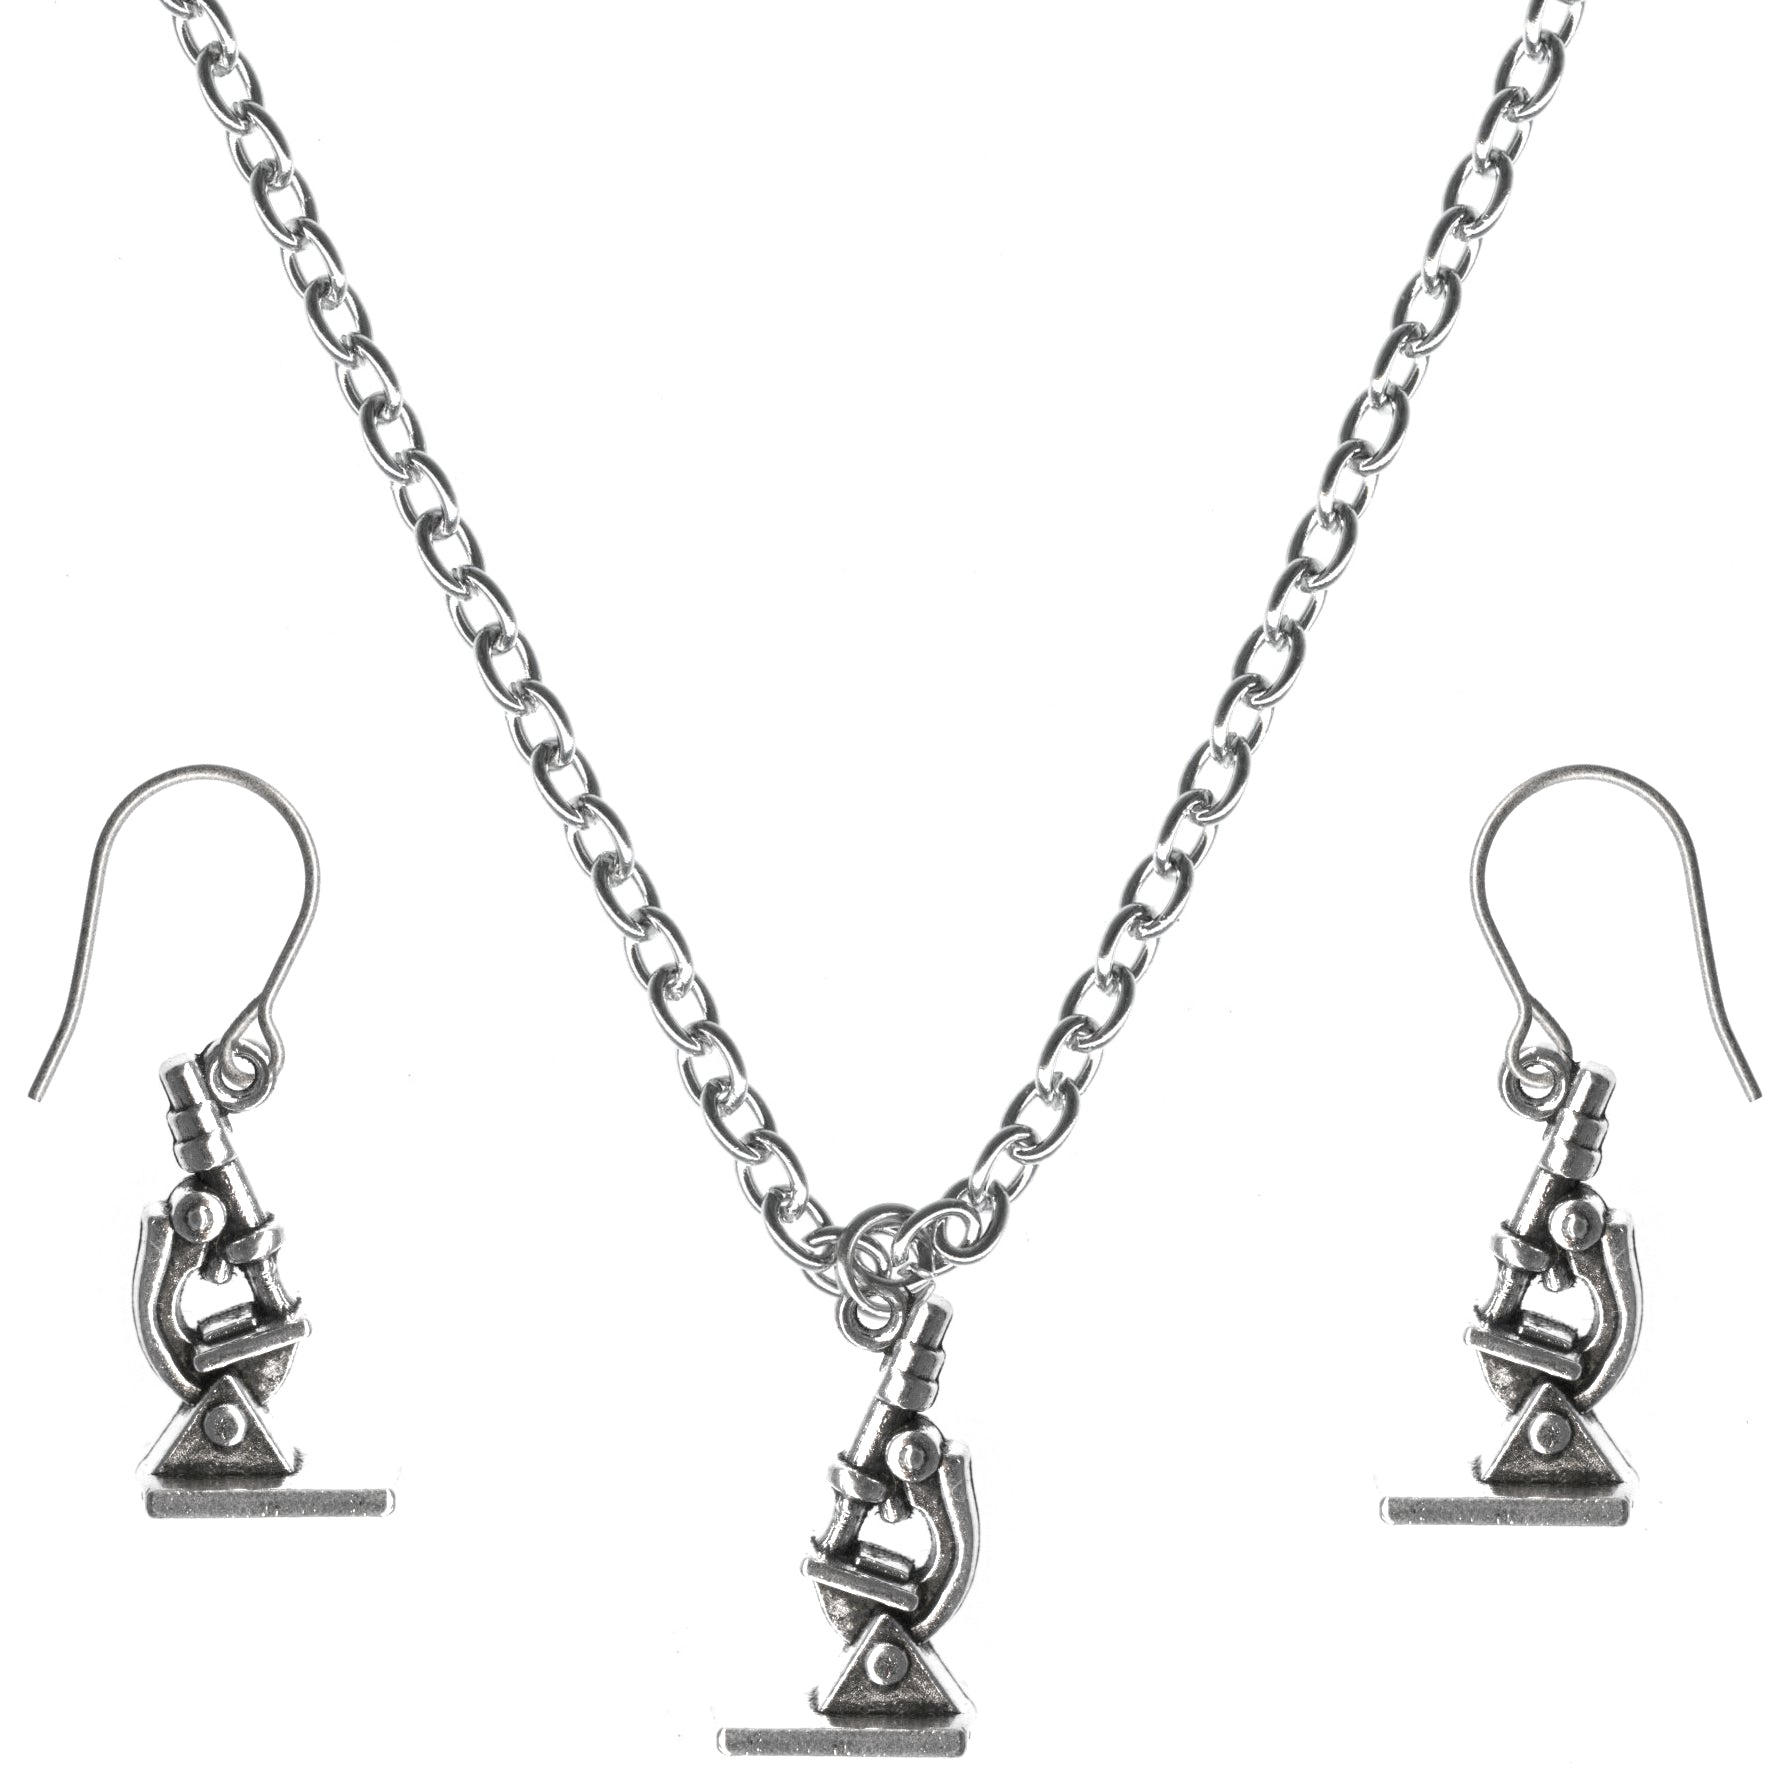 Microscope Science Charms Steel Chain Necklace and Hypoallergenic Titanium Earrings Set